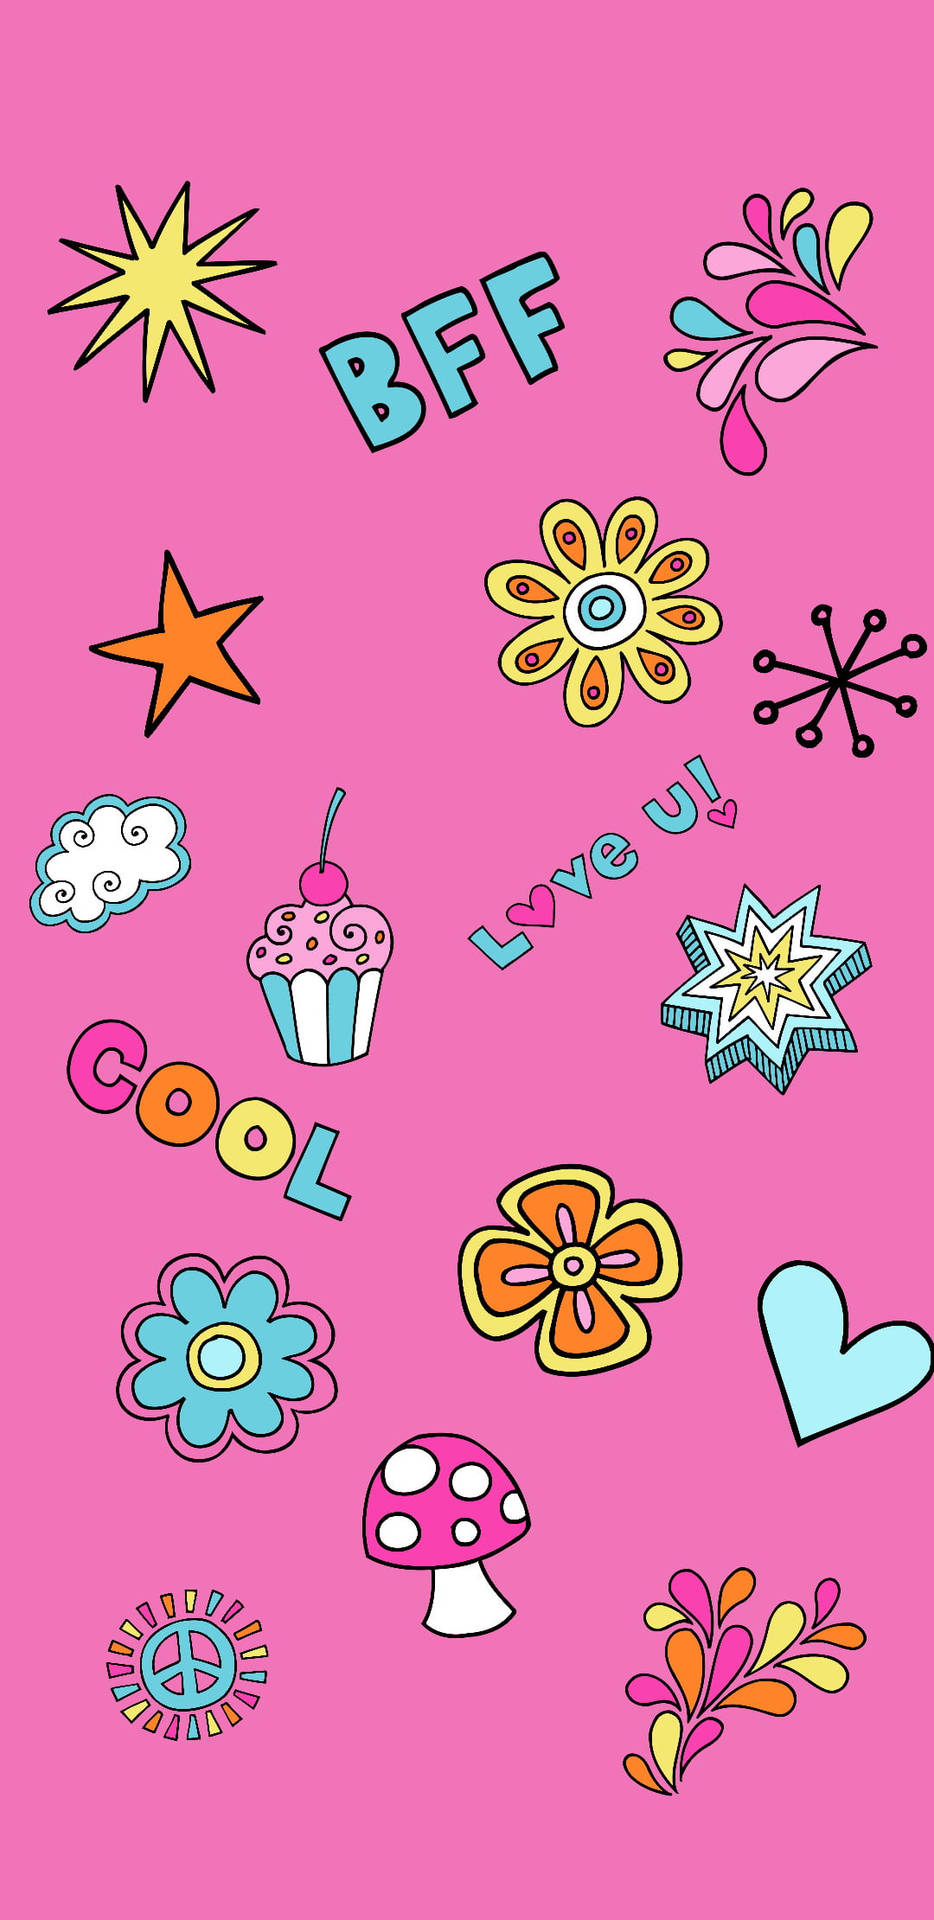 Cute Girly BFF Stickers Wallpaper